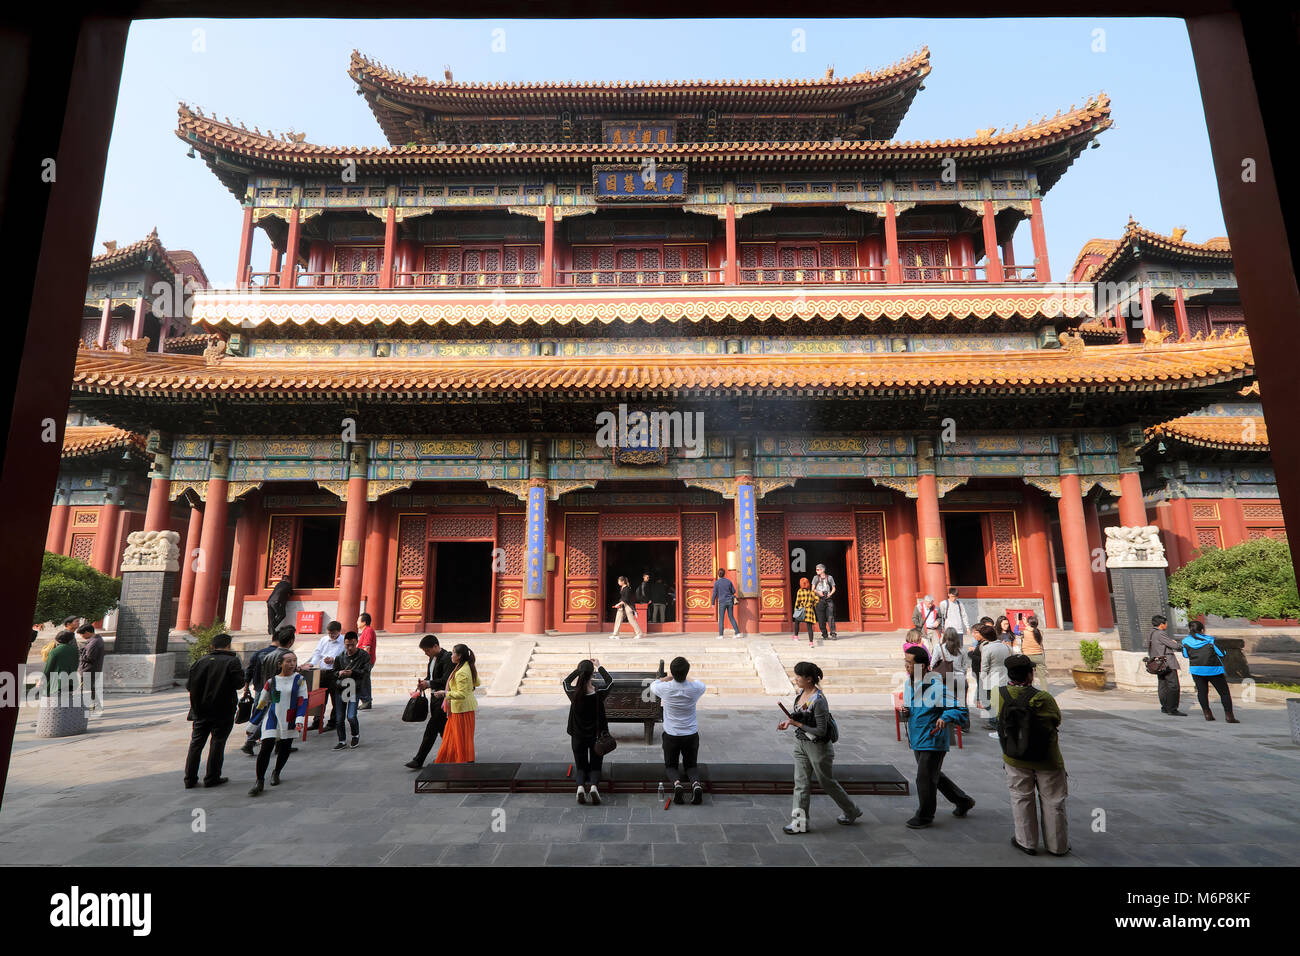 The Buddhist Lama Temple or Yonghe Lamasery Temple, Dongcheng District, Beijing, China Stock Photo